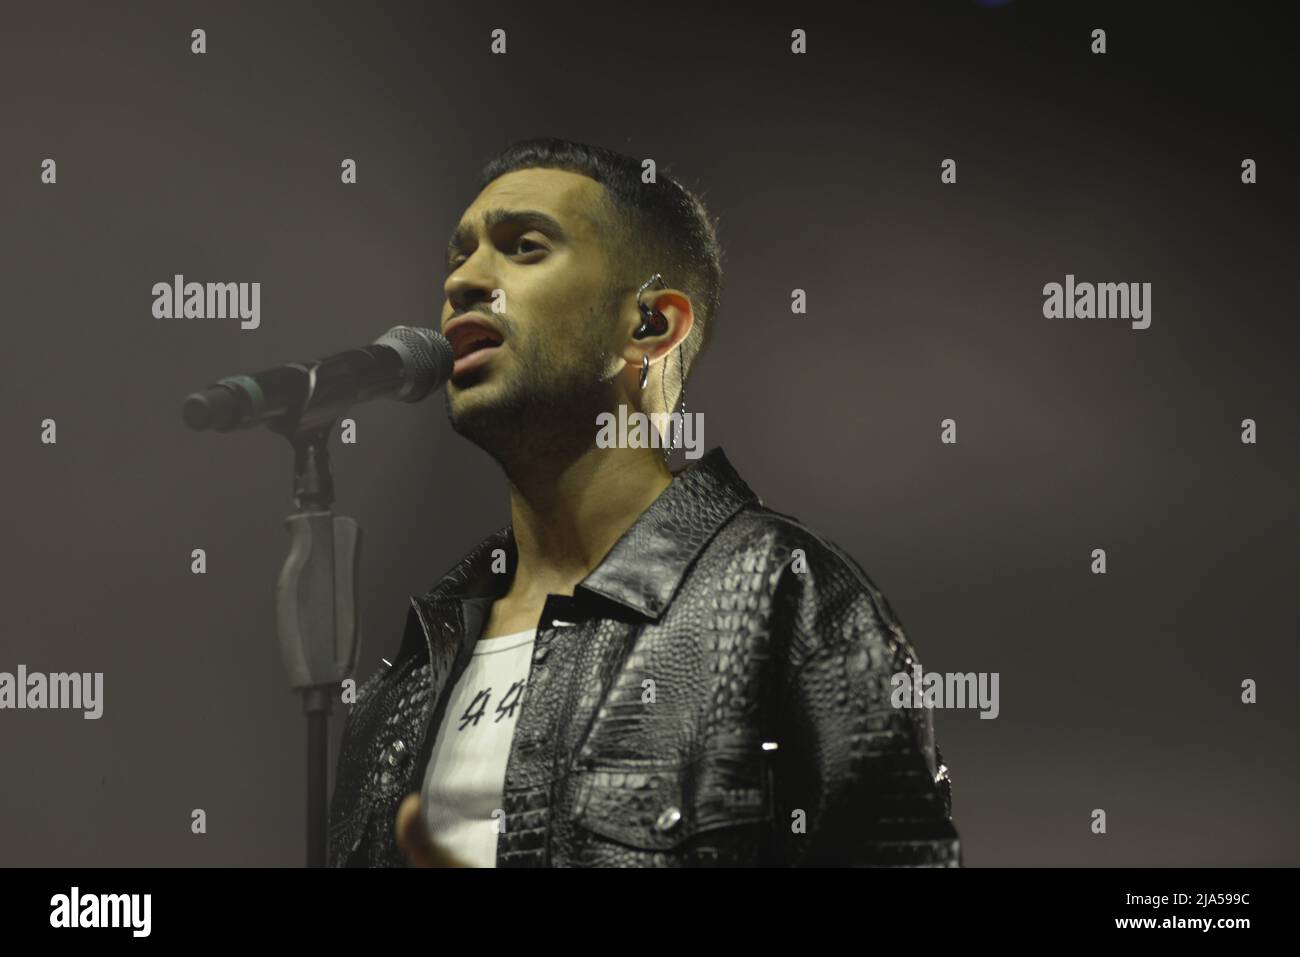 Alessandro Mahmoud, known professionally as Mahmood, is an Italian singer-songwriter. He rose to prominence after competing on the sixth season of the Italian version of The X Factor. He has won the Sanremo Music Festival twice, in 2019 with the song 'Soldi' and in 2022 alongside Blanco with the song 'Brividi'. His Sanremo victories allowed him to represent Italy at the Eurovision Song Contest in those respective years, finishing in second place in 2019 and in sixth place in 2022 as the host entrant. Mahmood has released two studio albums, Gioventù bruciata and Ghettolimpo, both of which reach Stock Photo